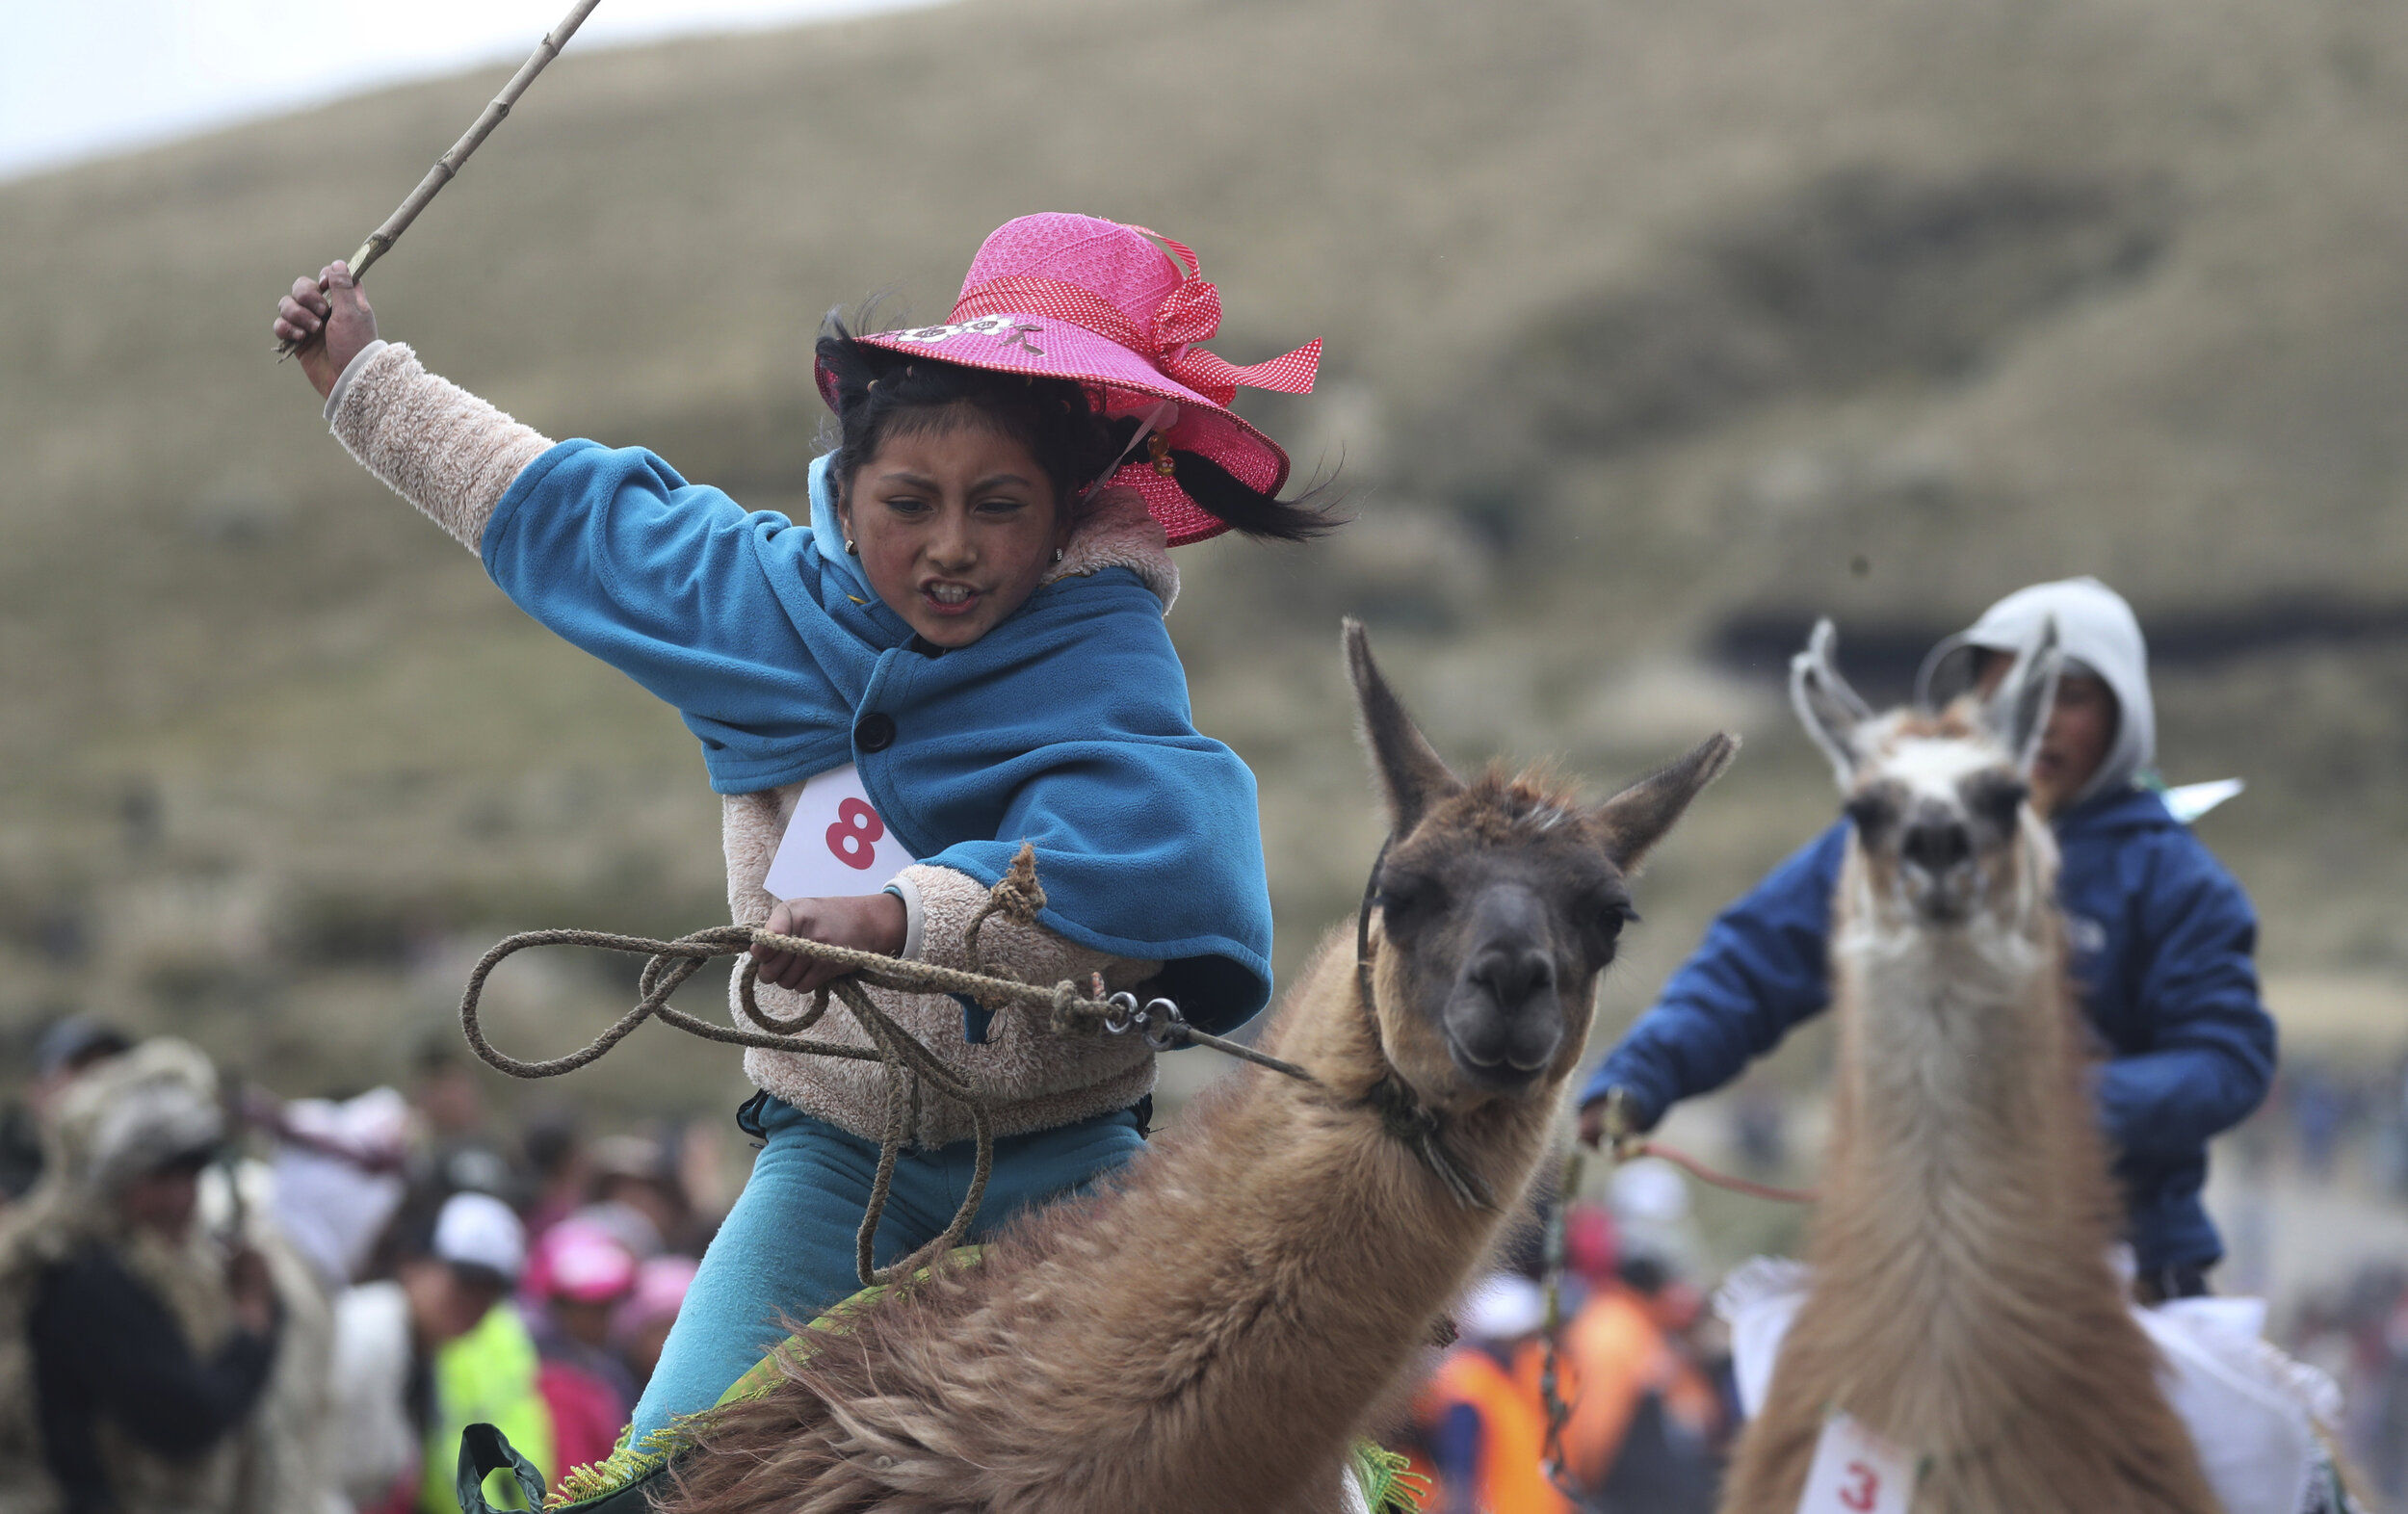  Milena Jami whips her llama to secure first place in the 500-meter llama race, age 7-8 category, at Llanganates National Park in Ecuador, Saturday, Feb. 8, 2020. (AP Photo/Dolores Ochoa) 